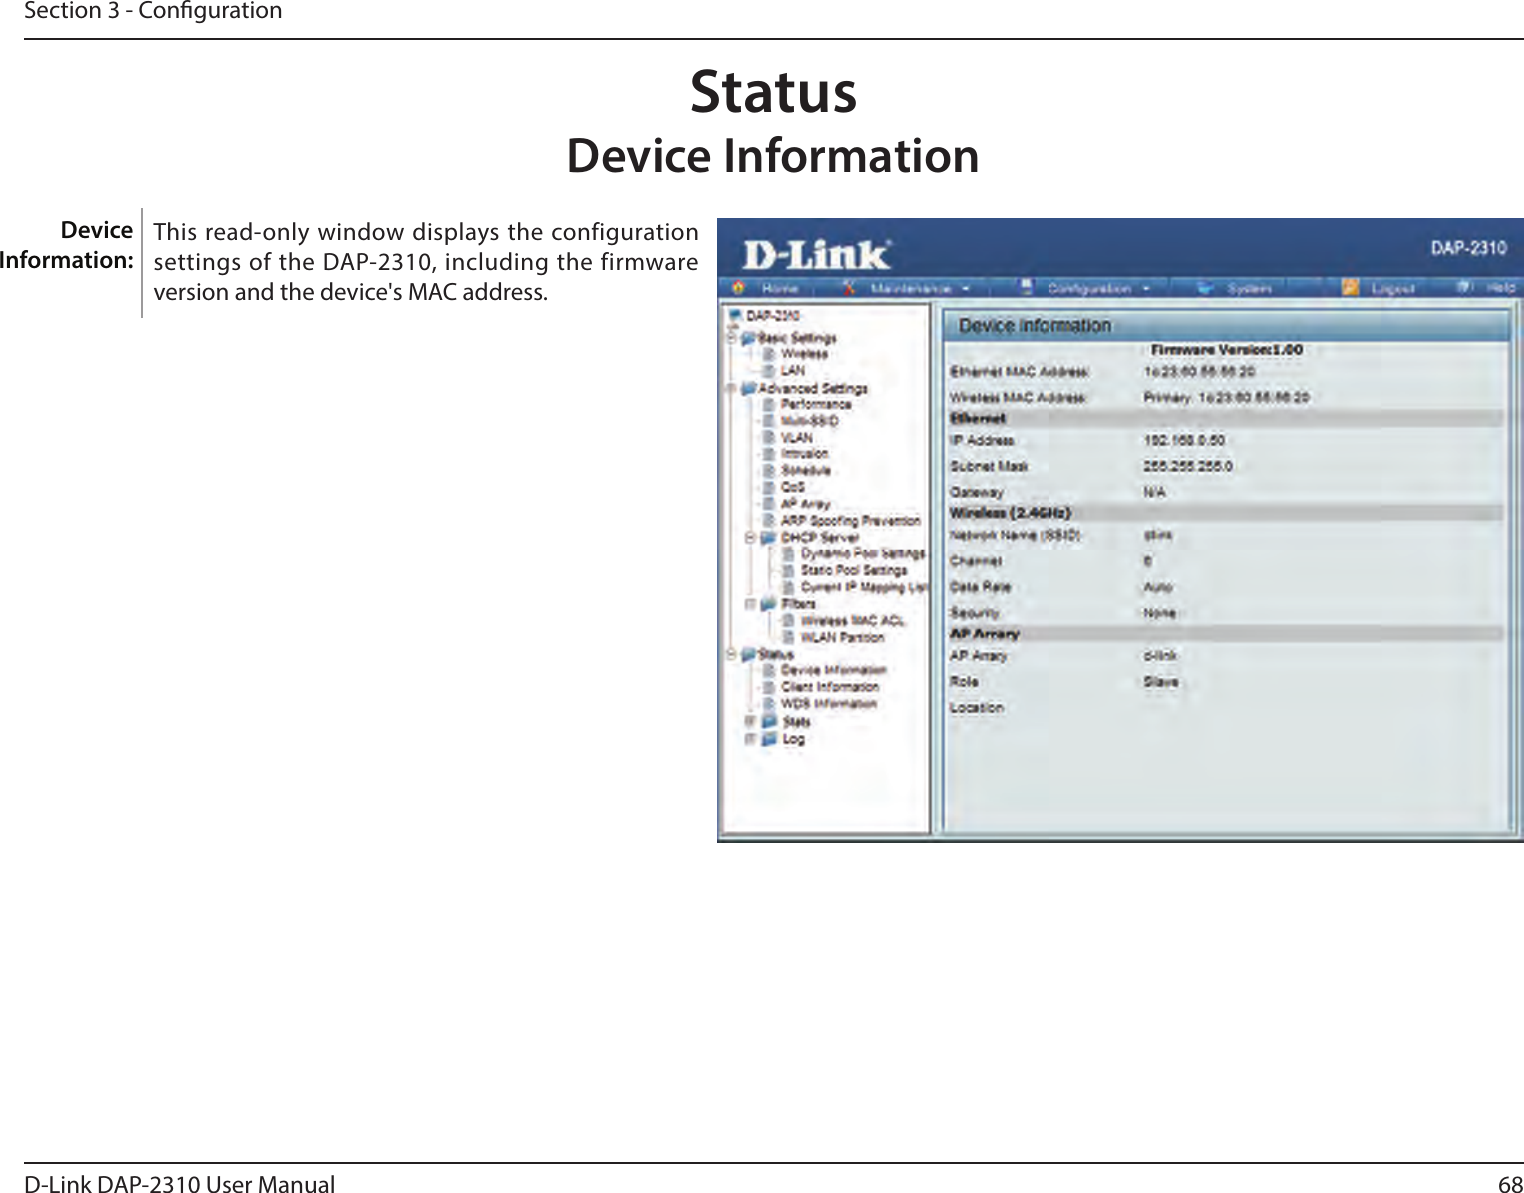 68D-Link DAP-2310 User ManualSection 3 - CongurationStatus Device InformationThis read-only window displays the configuration settings of the DAP-2310, including the firmware version and the device&apos;s MAC address.Device Information: